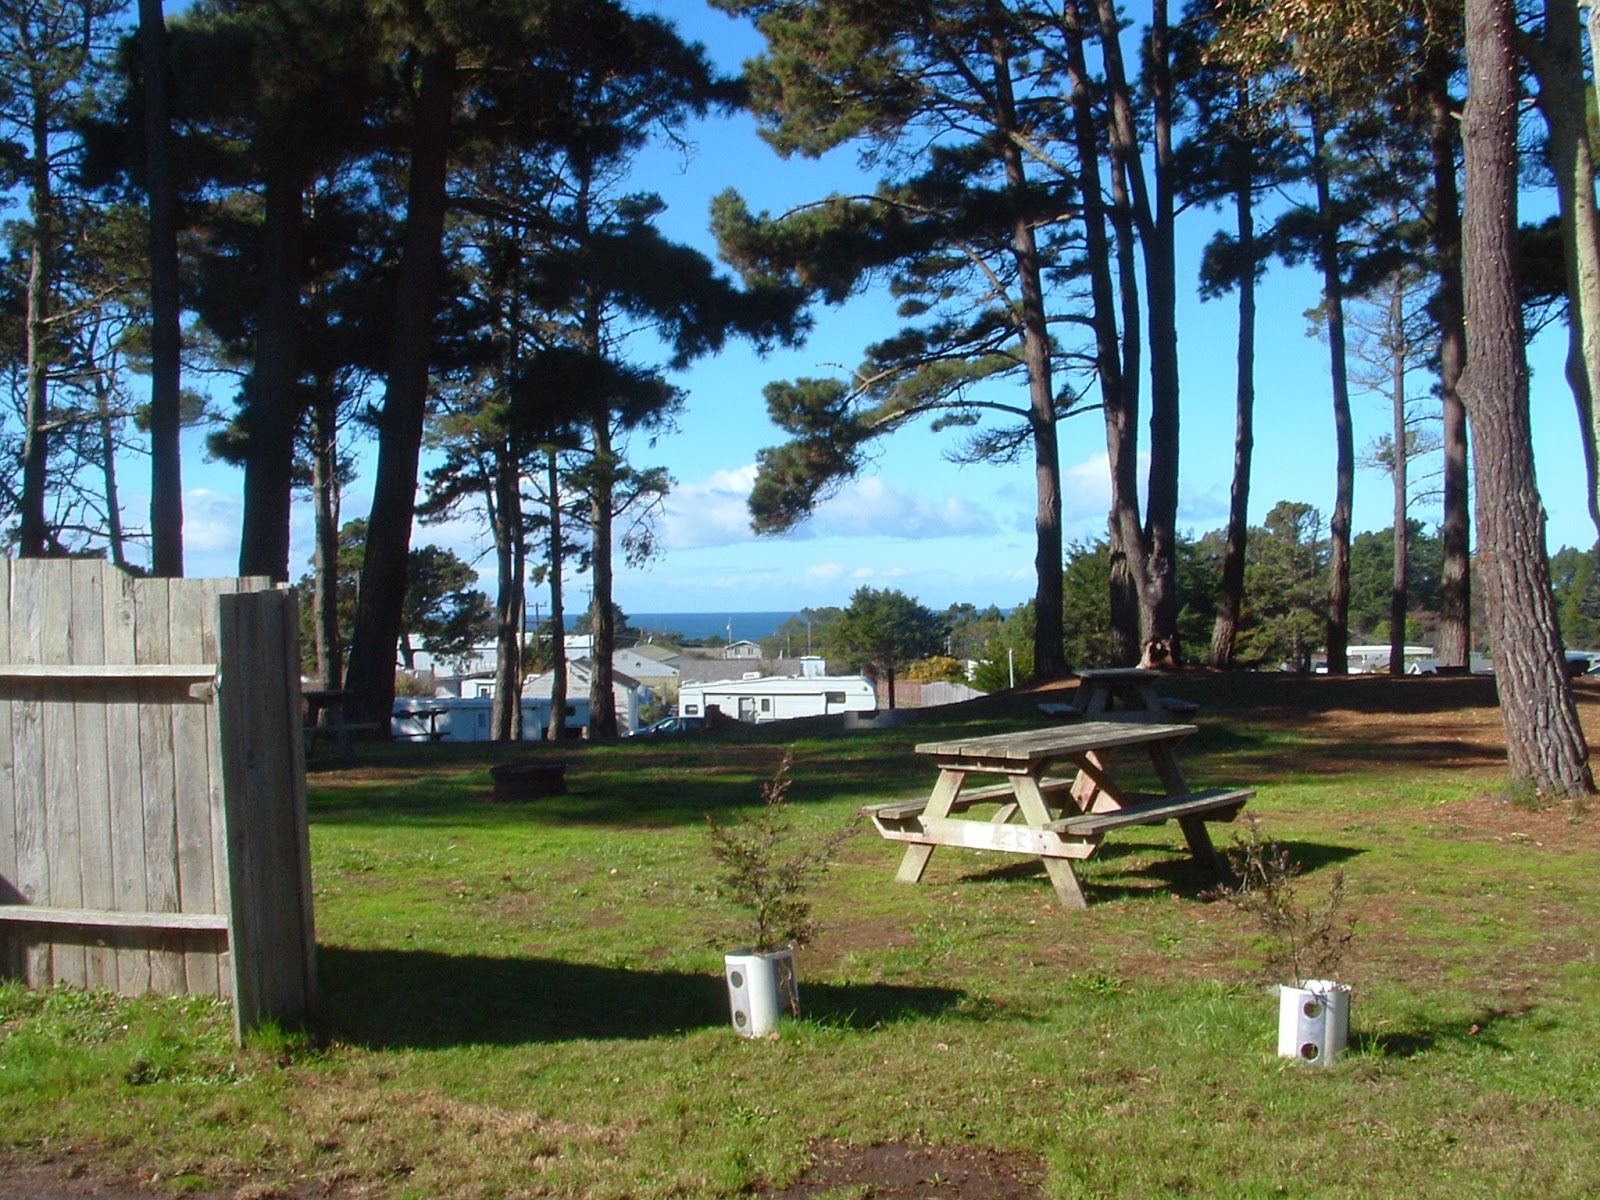 Hidden Pines RV Park Campground - Fort Bragg California : February 2014 Fort Bragg Rv Camping On The Beach